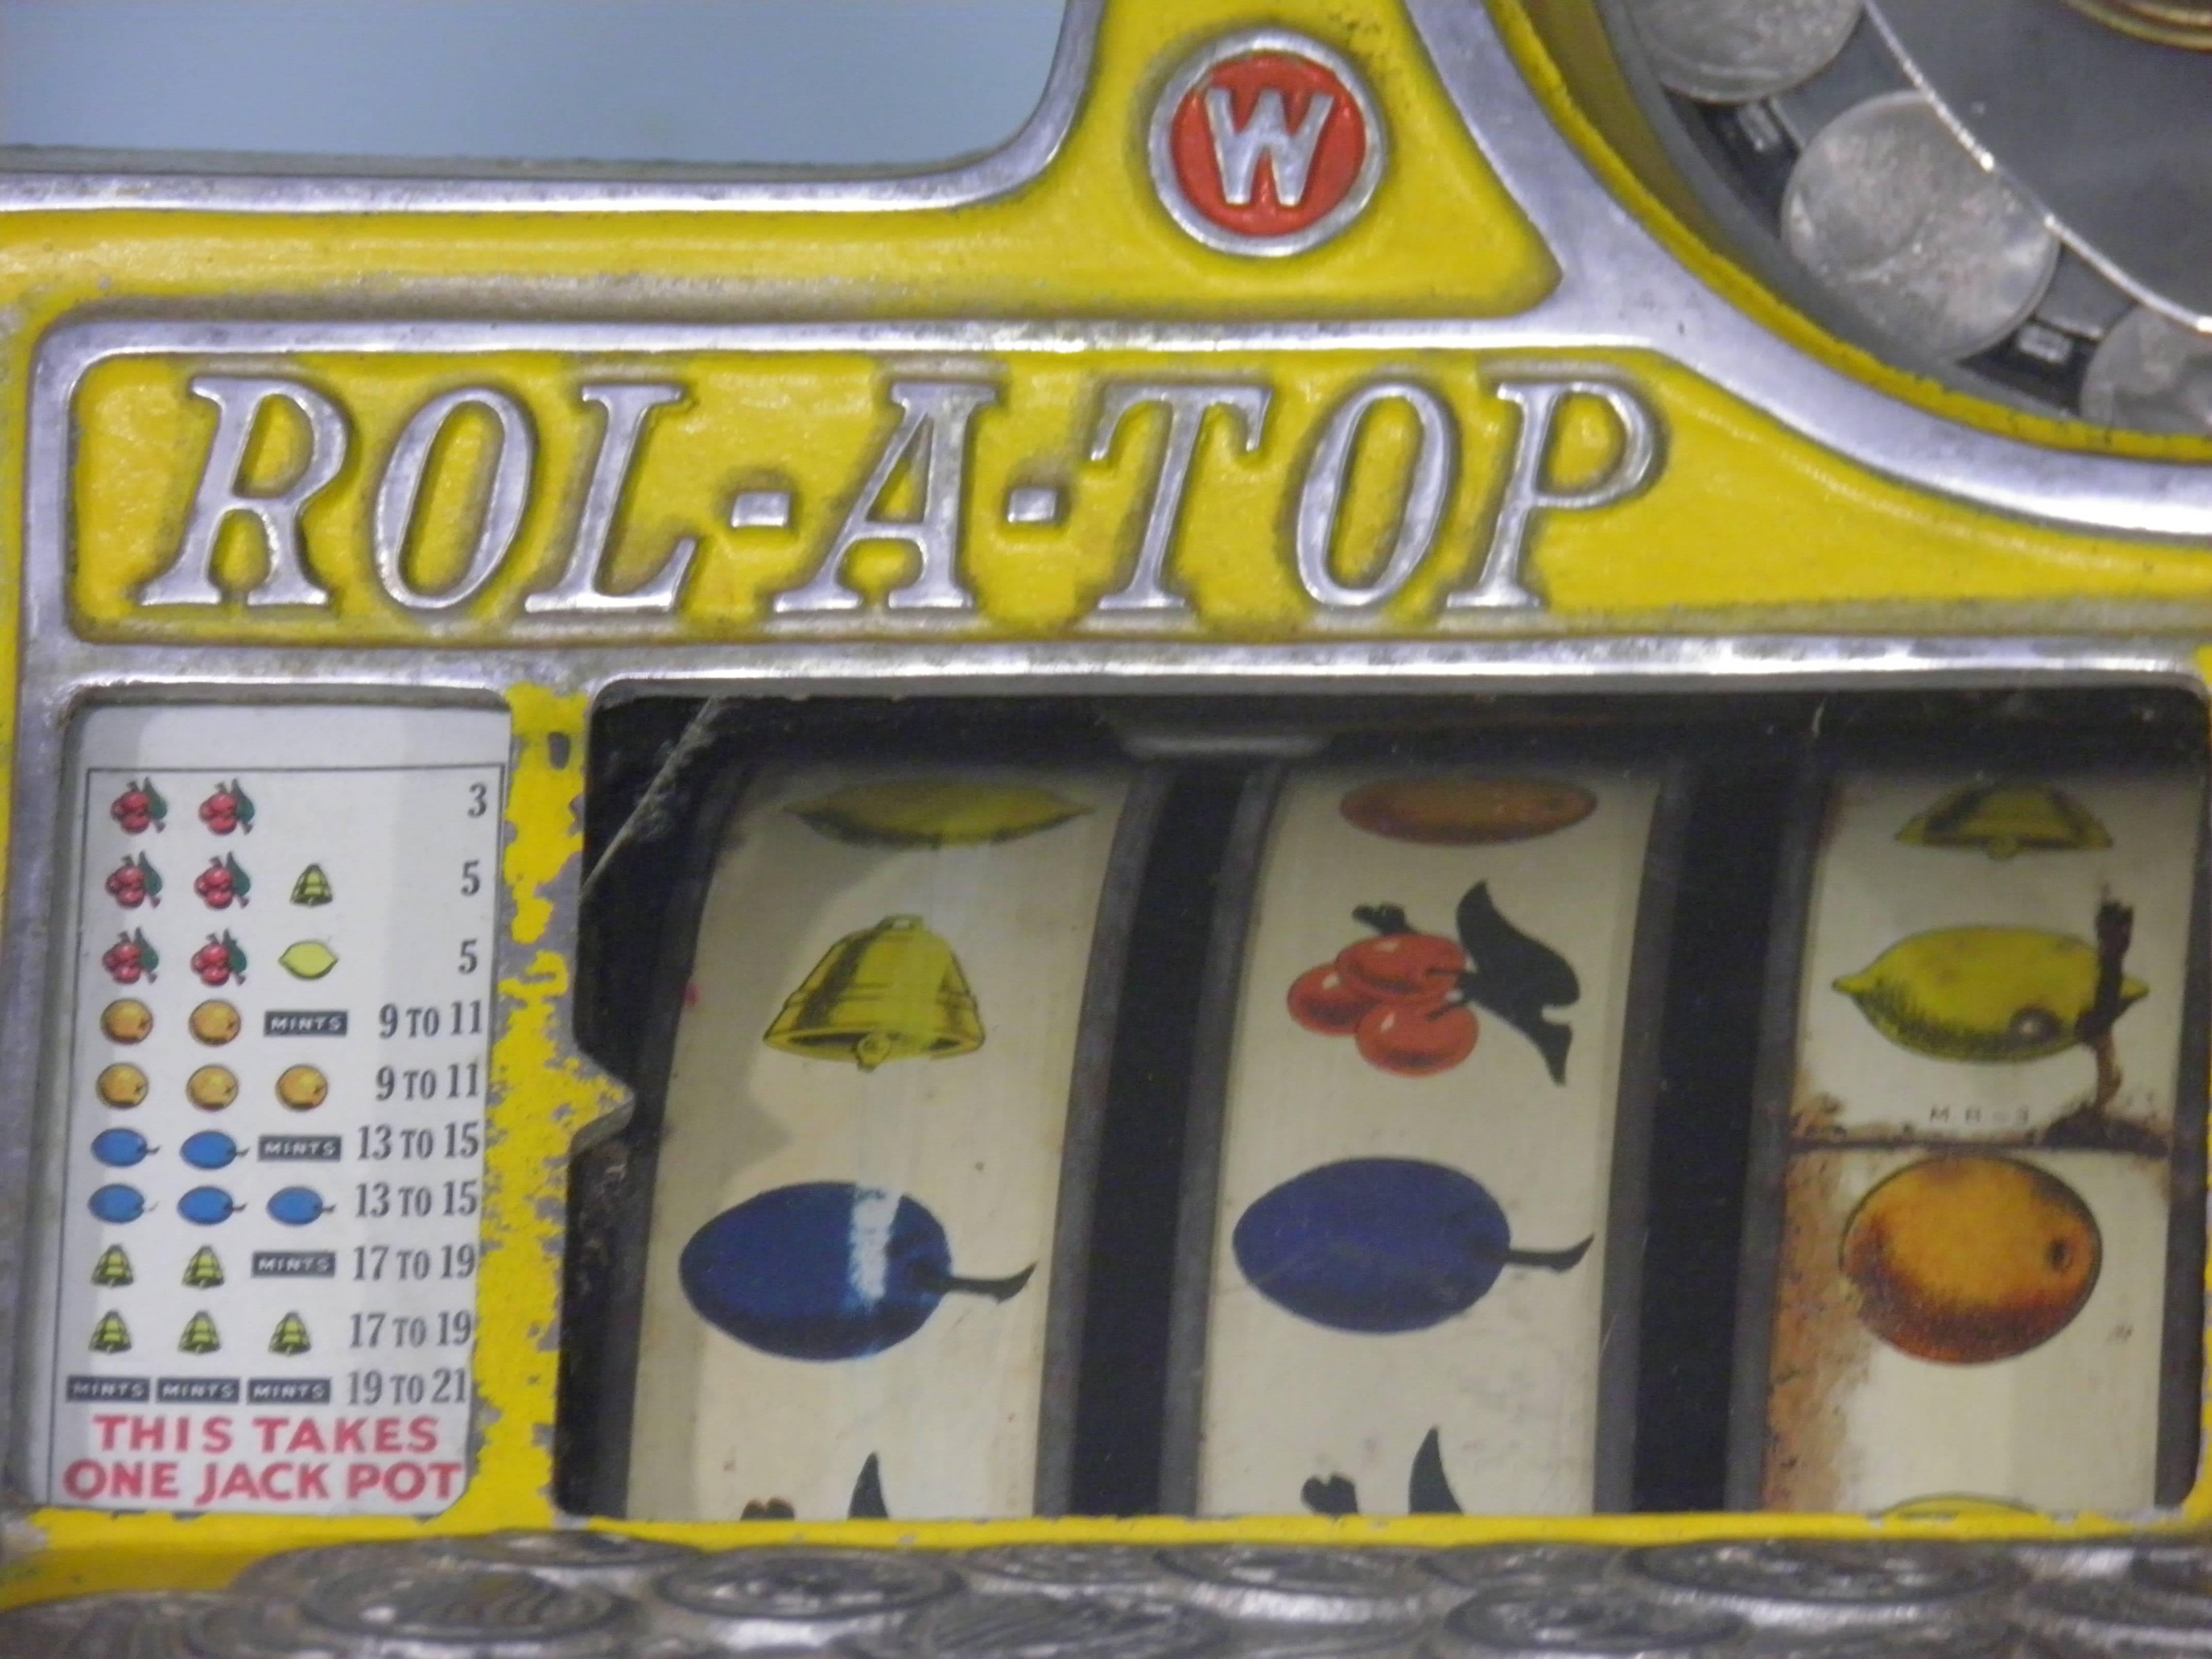 Hollywood Regency Antique Slot Machine Watling Coin Front Rol-A-Top with Eagle Motif For Sale